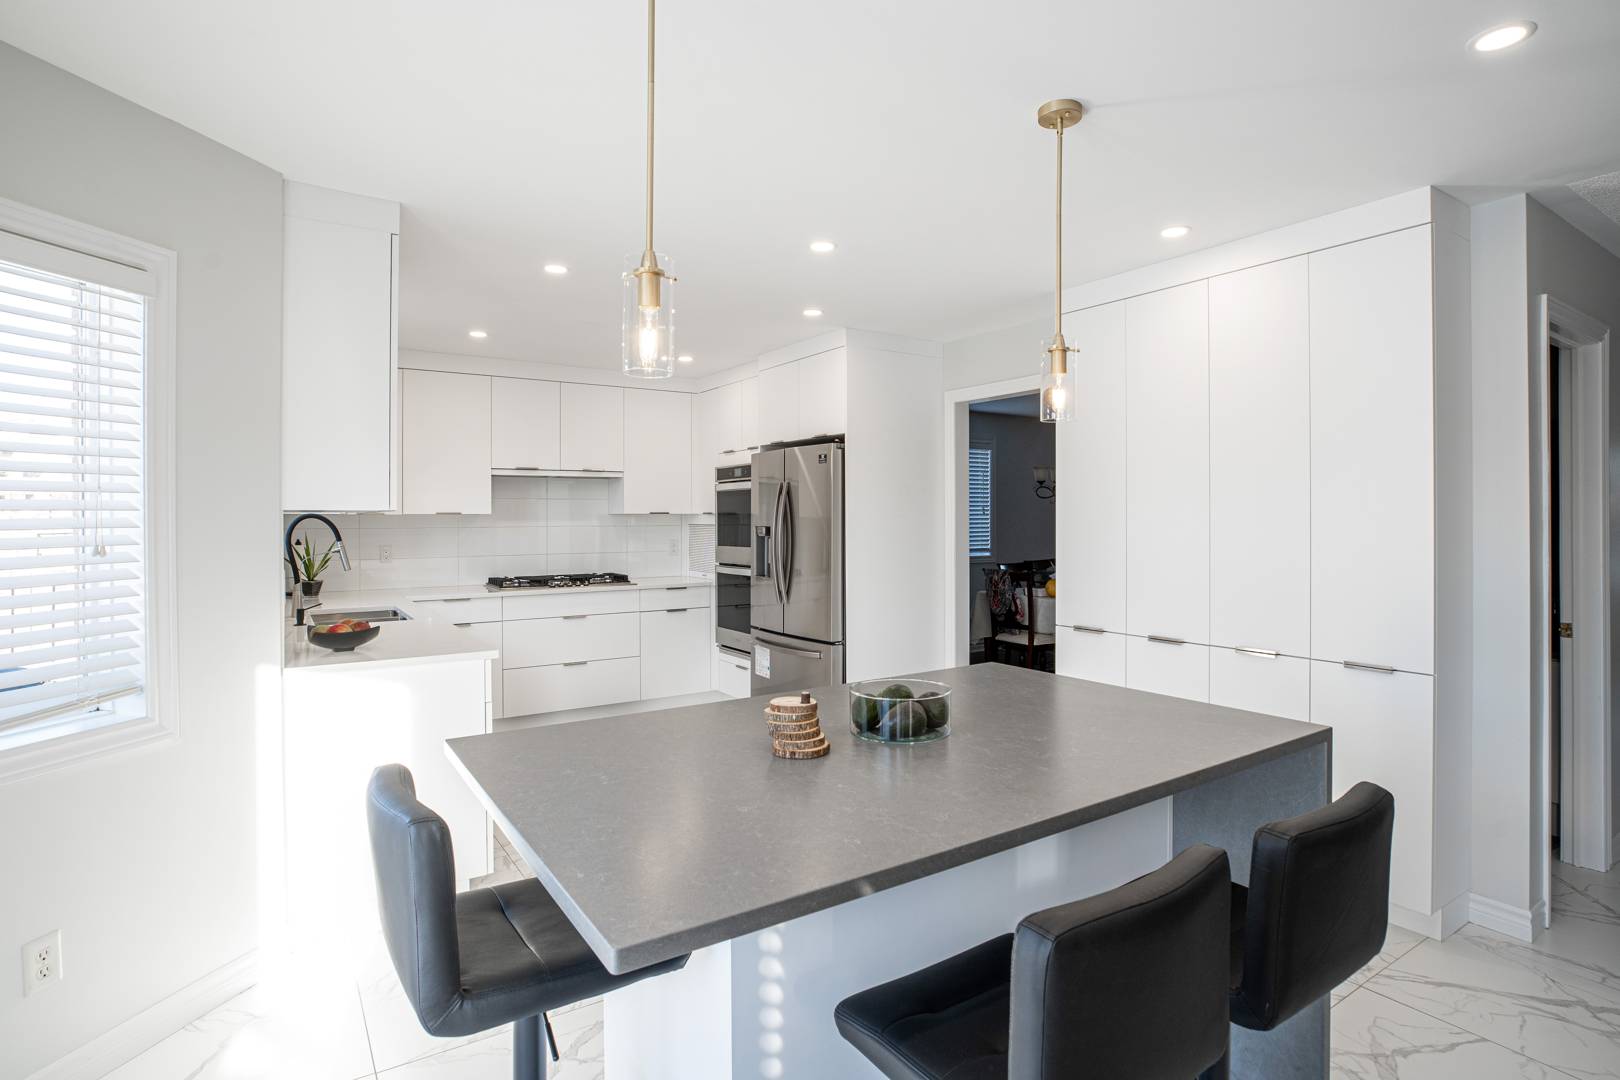 White kitchen design with extra cabinetry and a built-in kitchen island